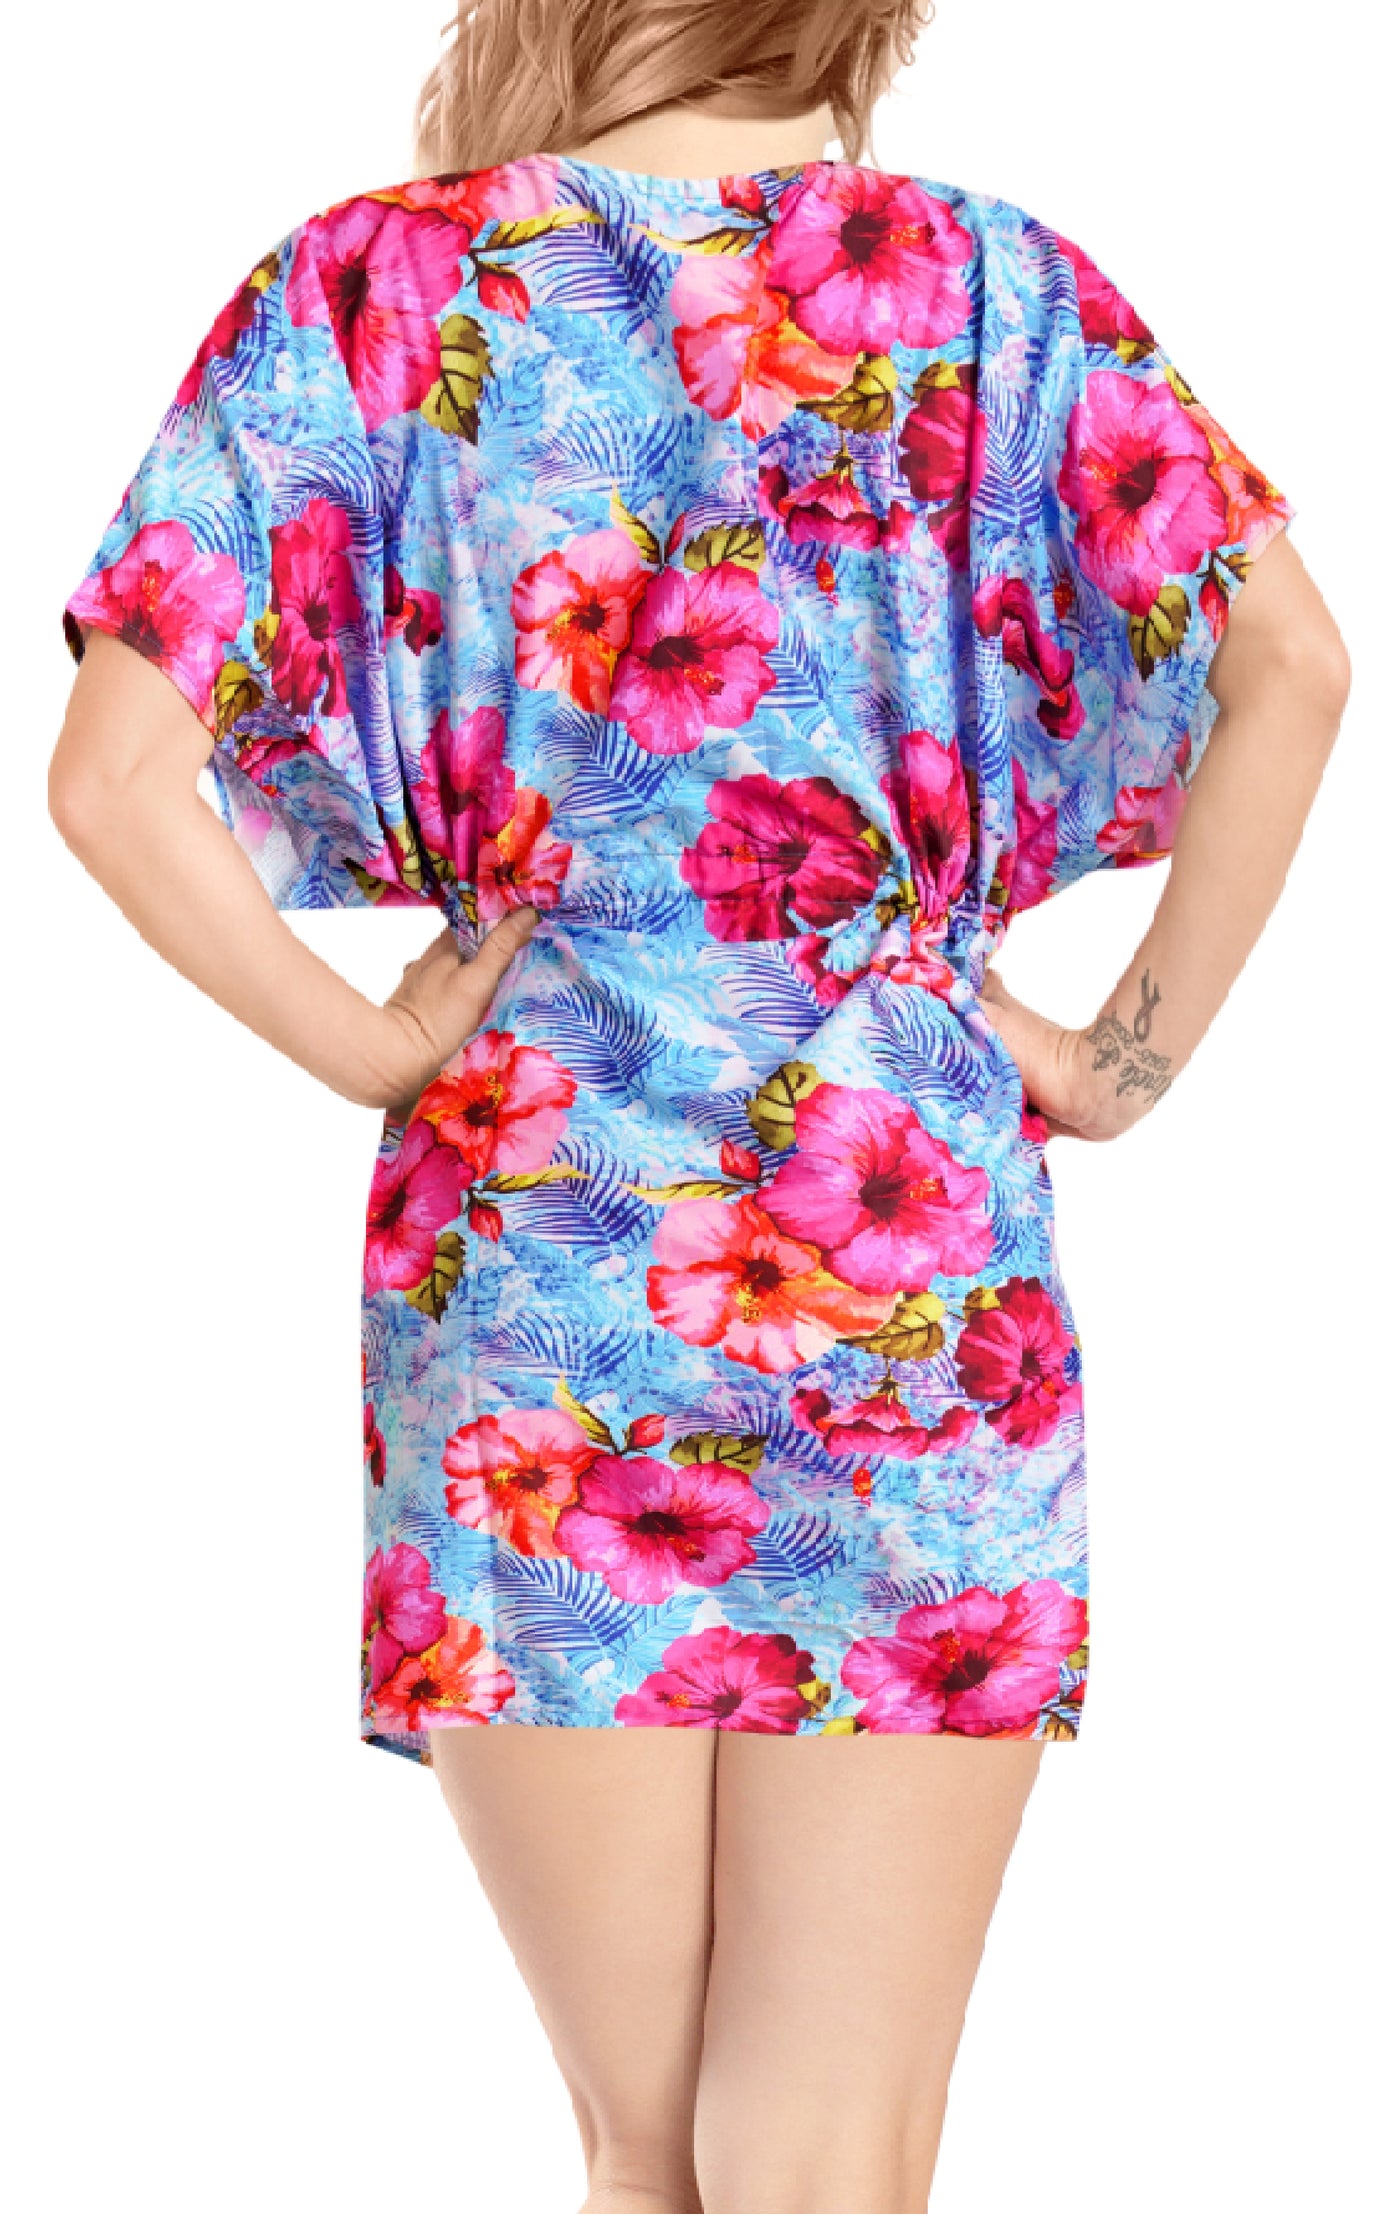 Radiant Blue with Pink Hibiscus Blossoms coverup for women